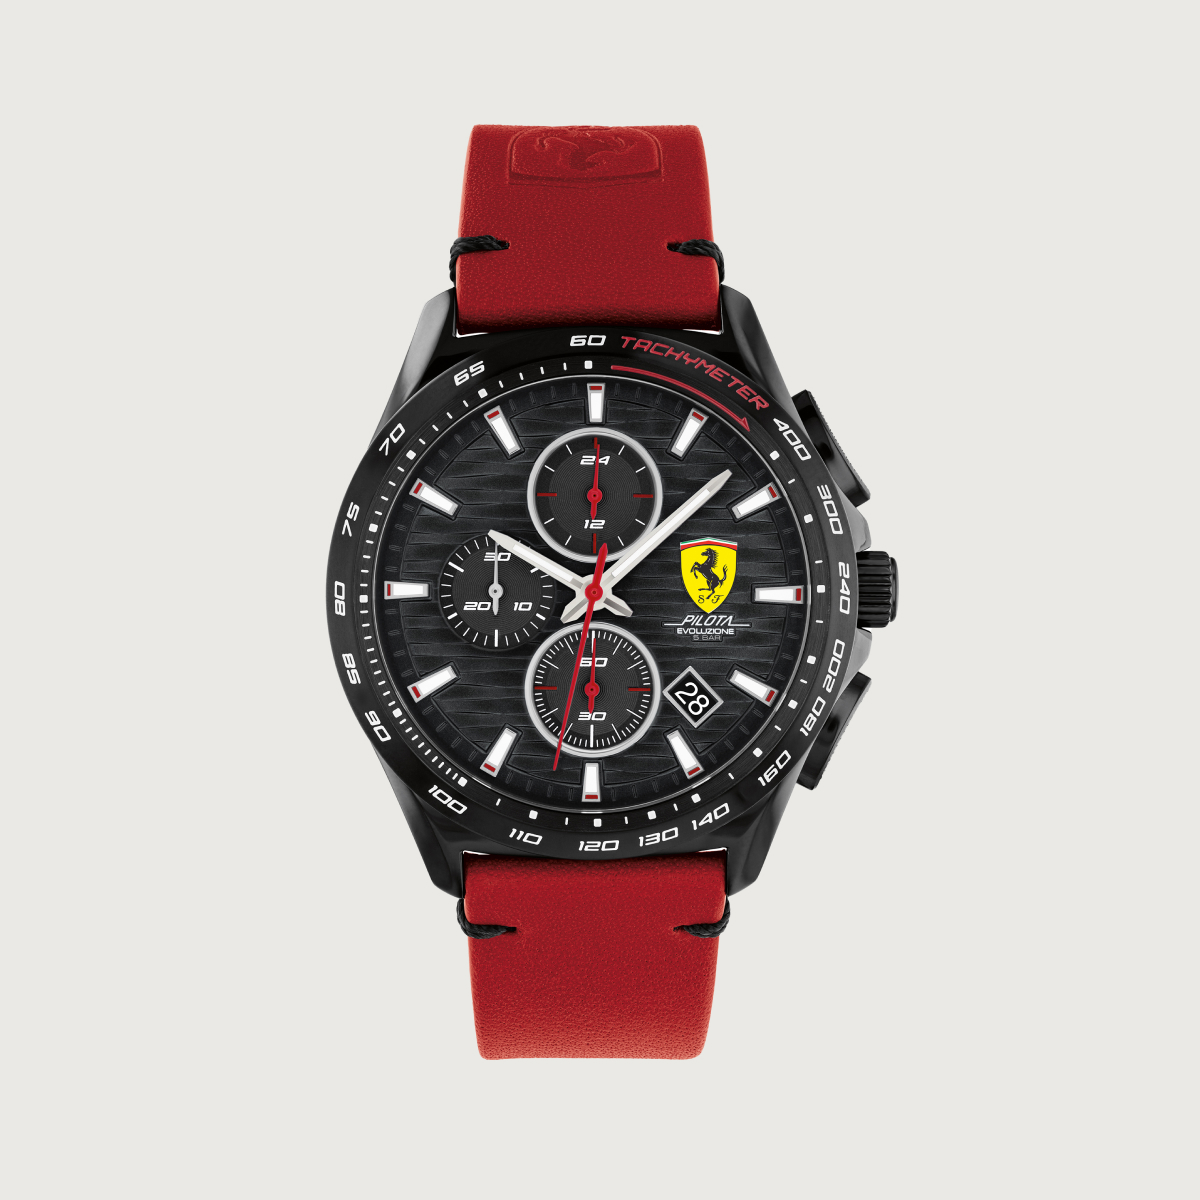 Pilota Evo cronograph watch with black dial and red leather strap